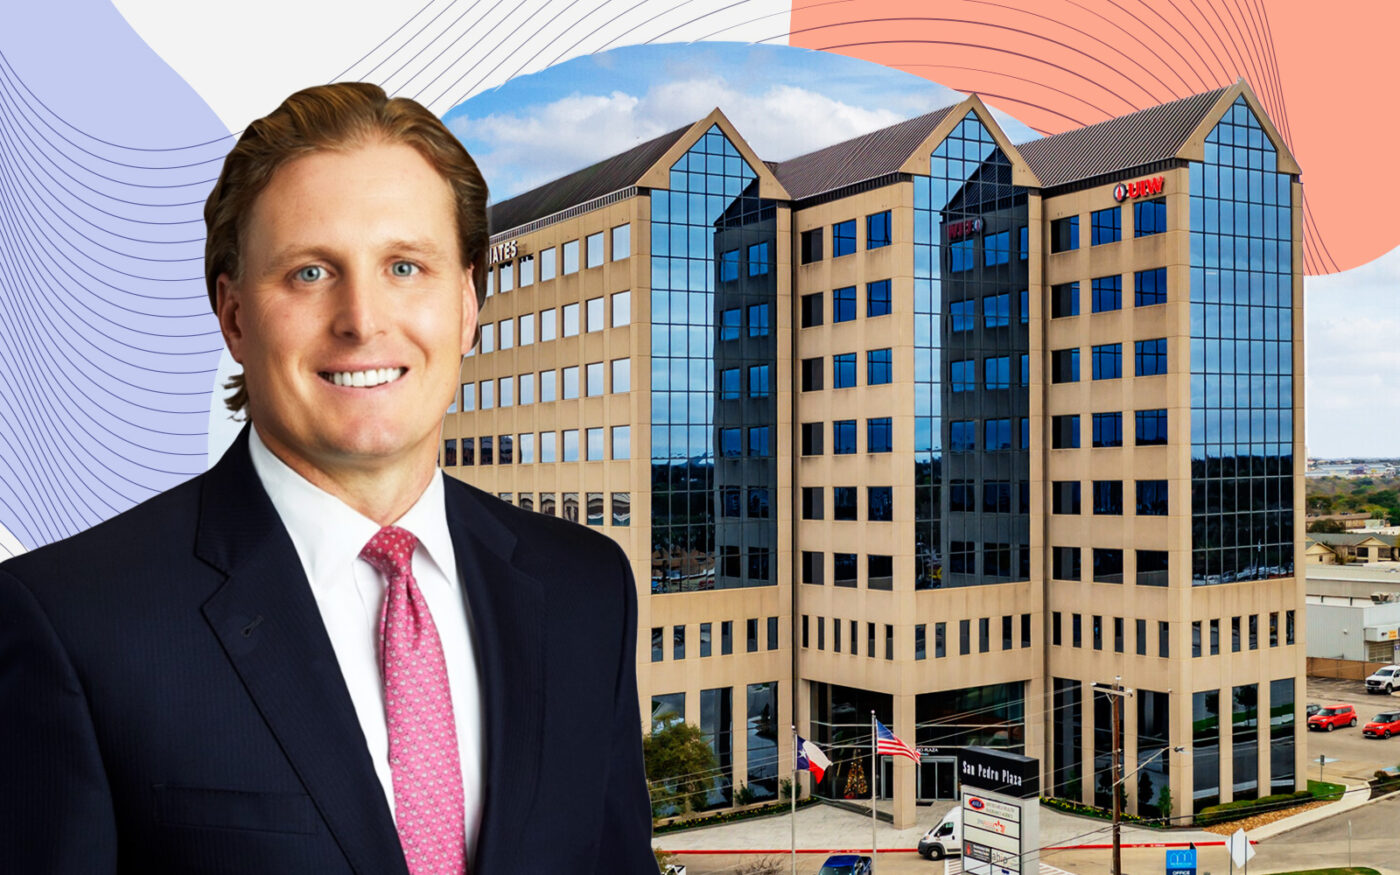 Dogwood Commercial Bets on San Antonio Office Investment